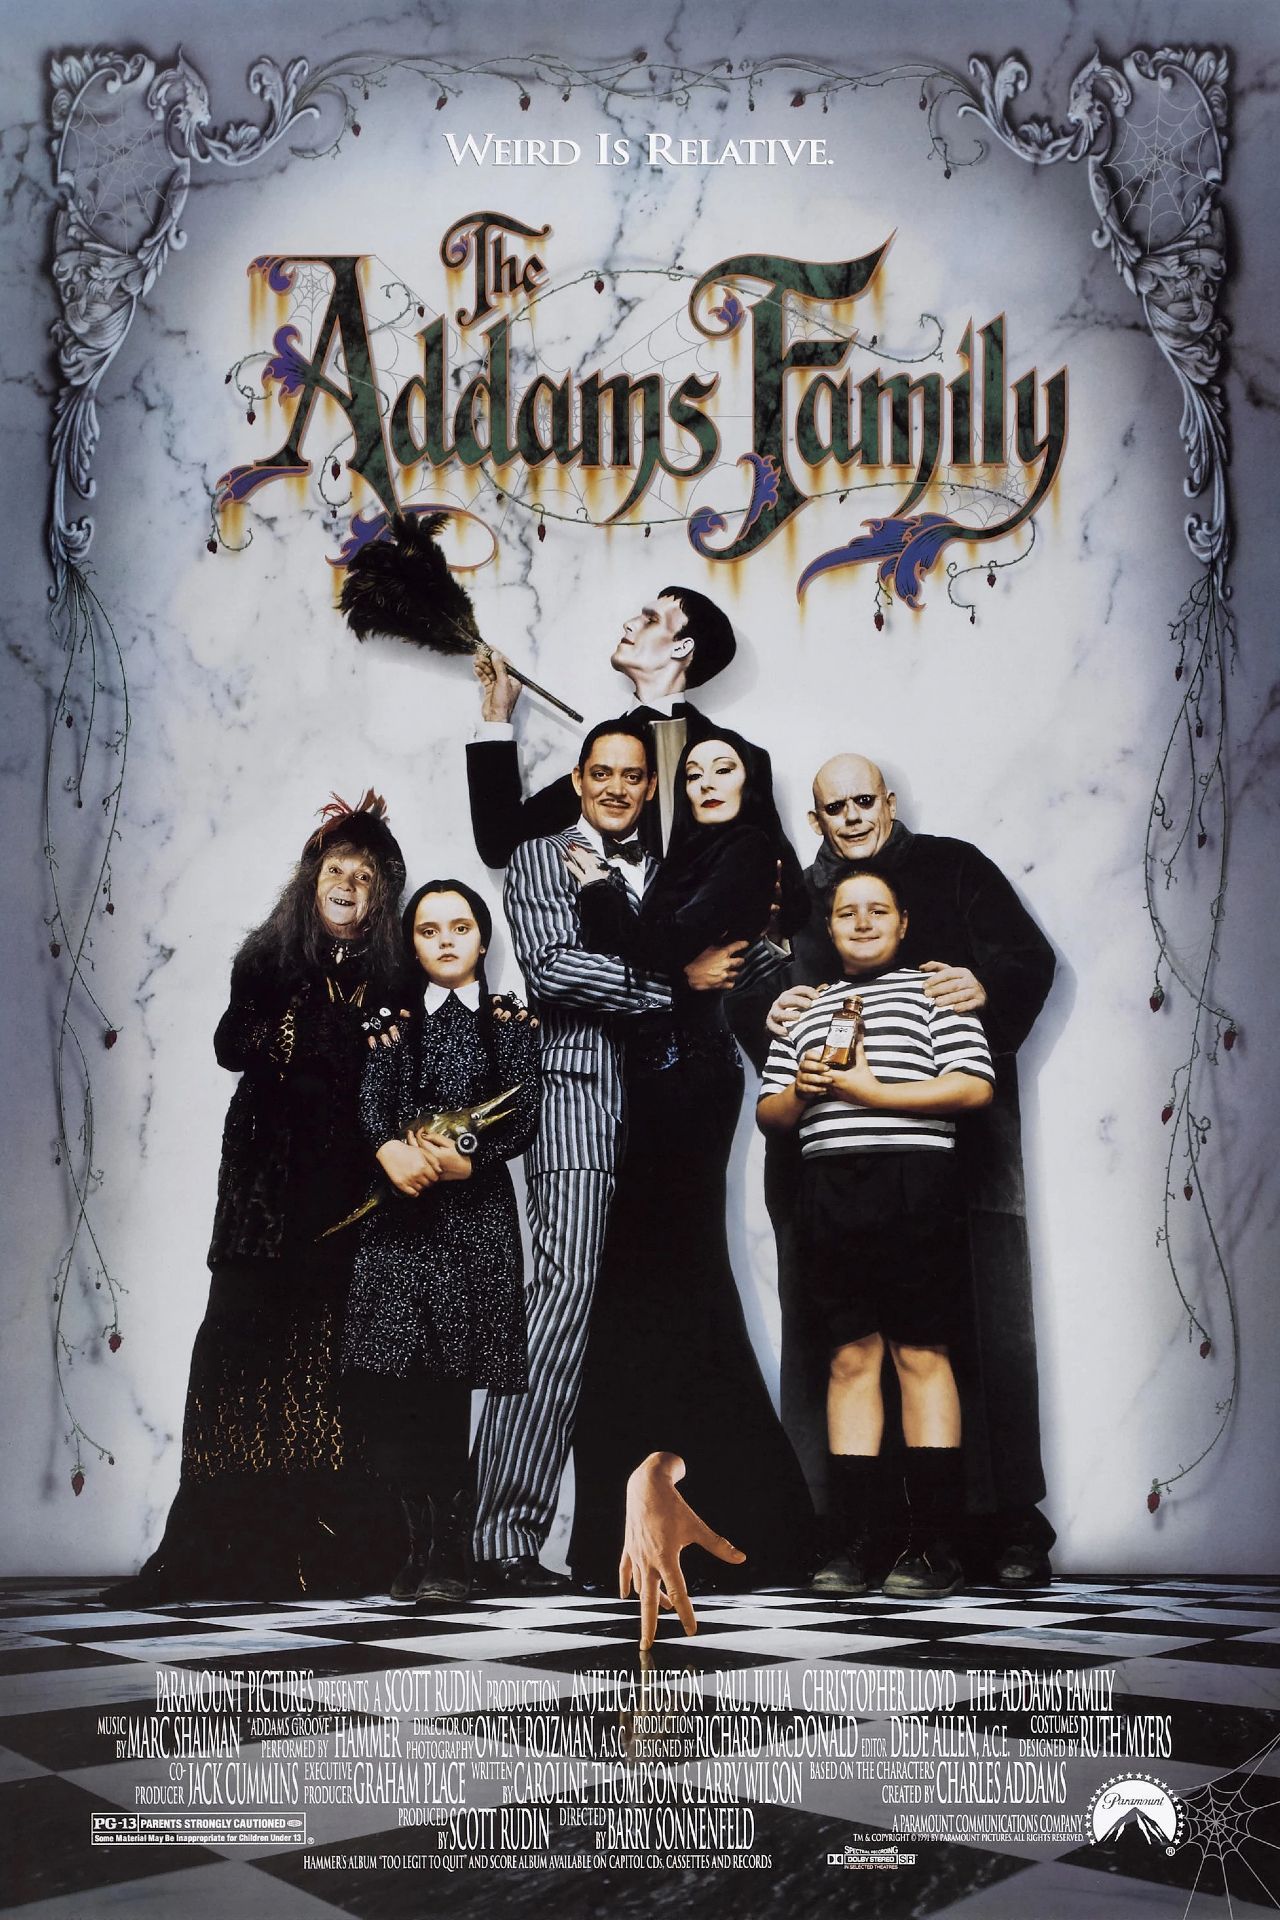 The Addams Family 1991 Movie Poster